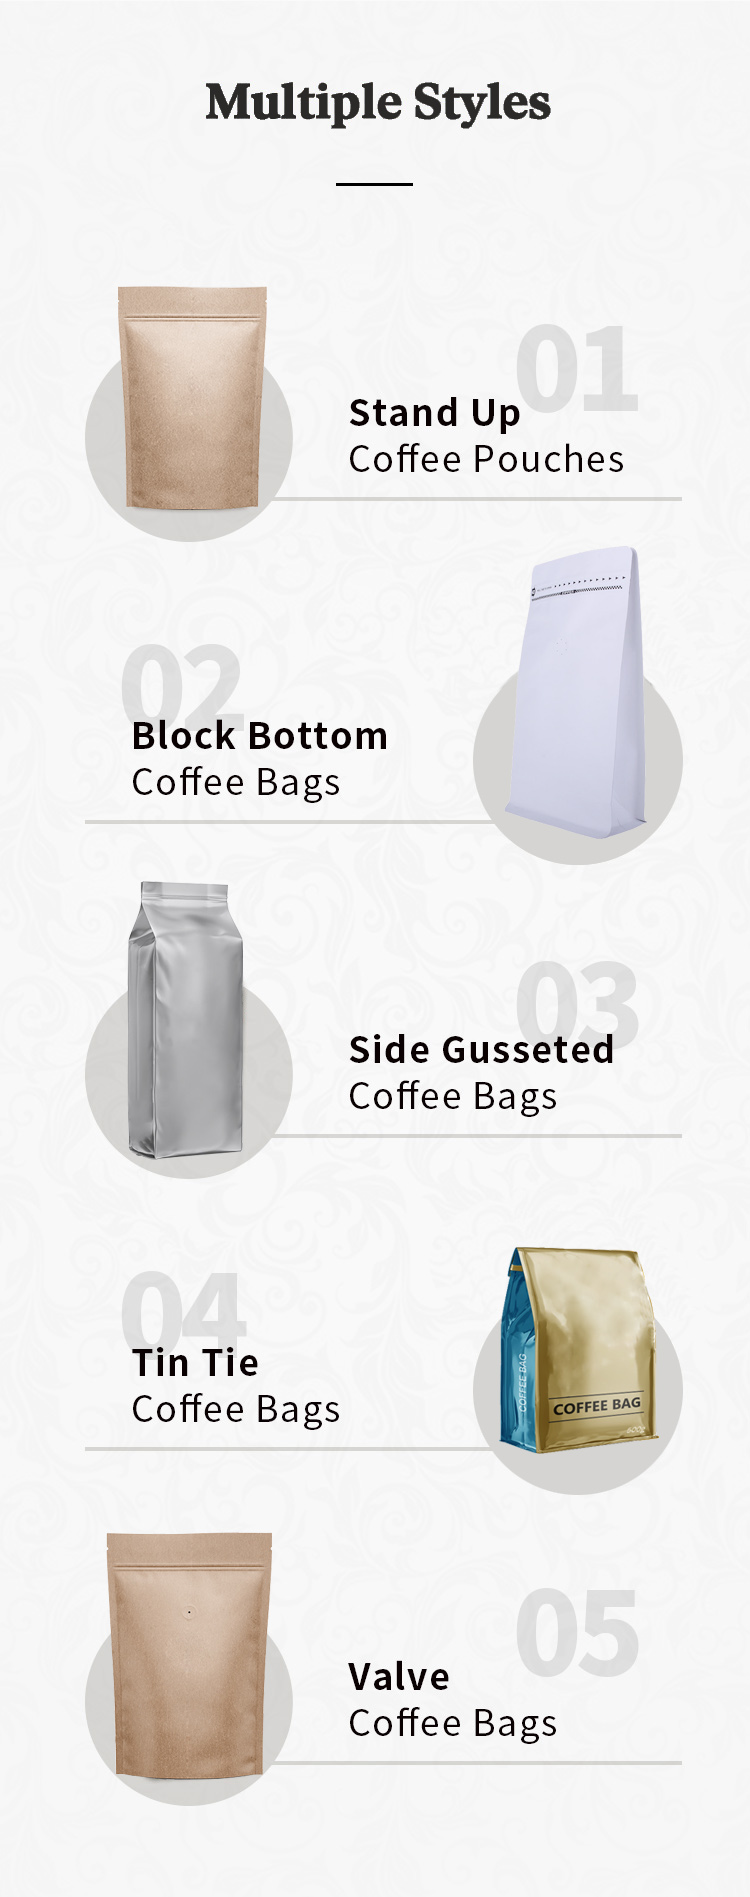 100% compostable valve zipper coffee packaging pouch